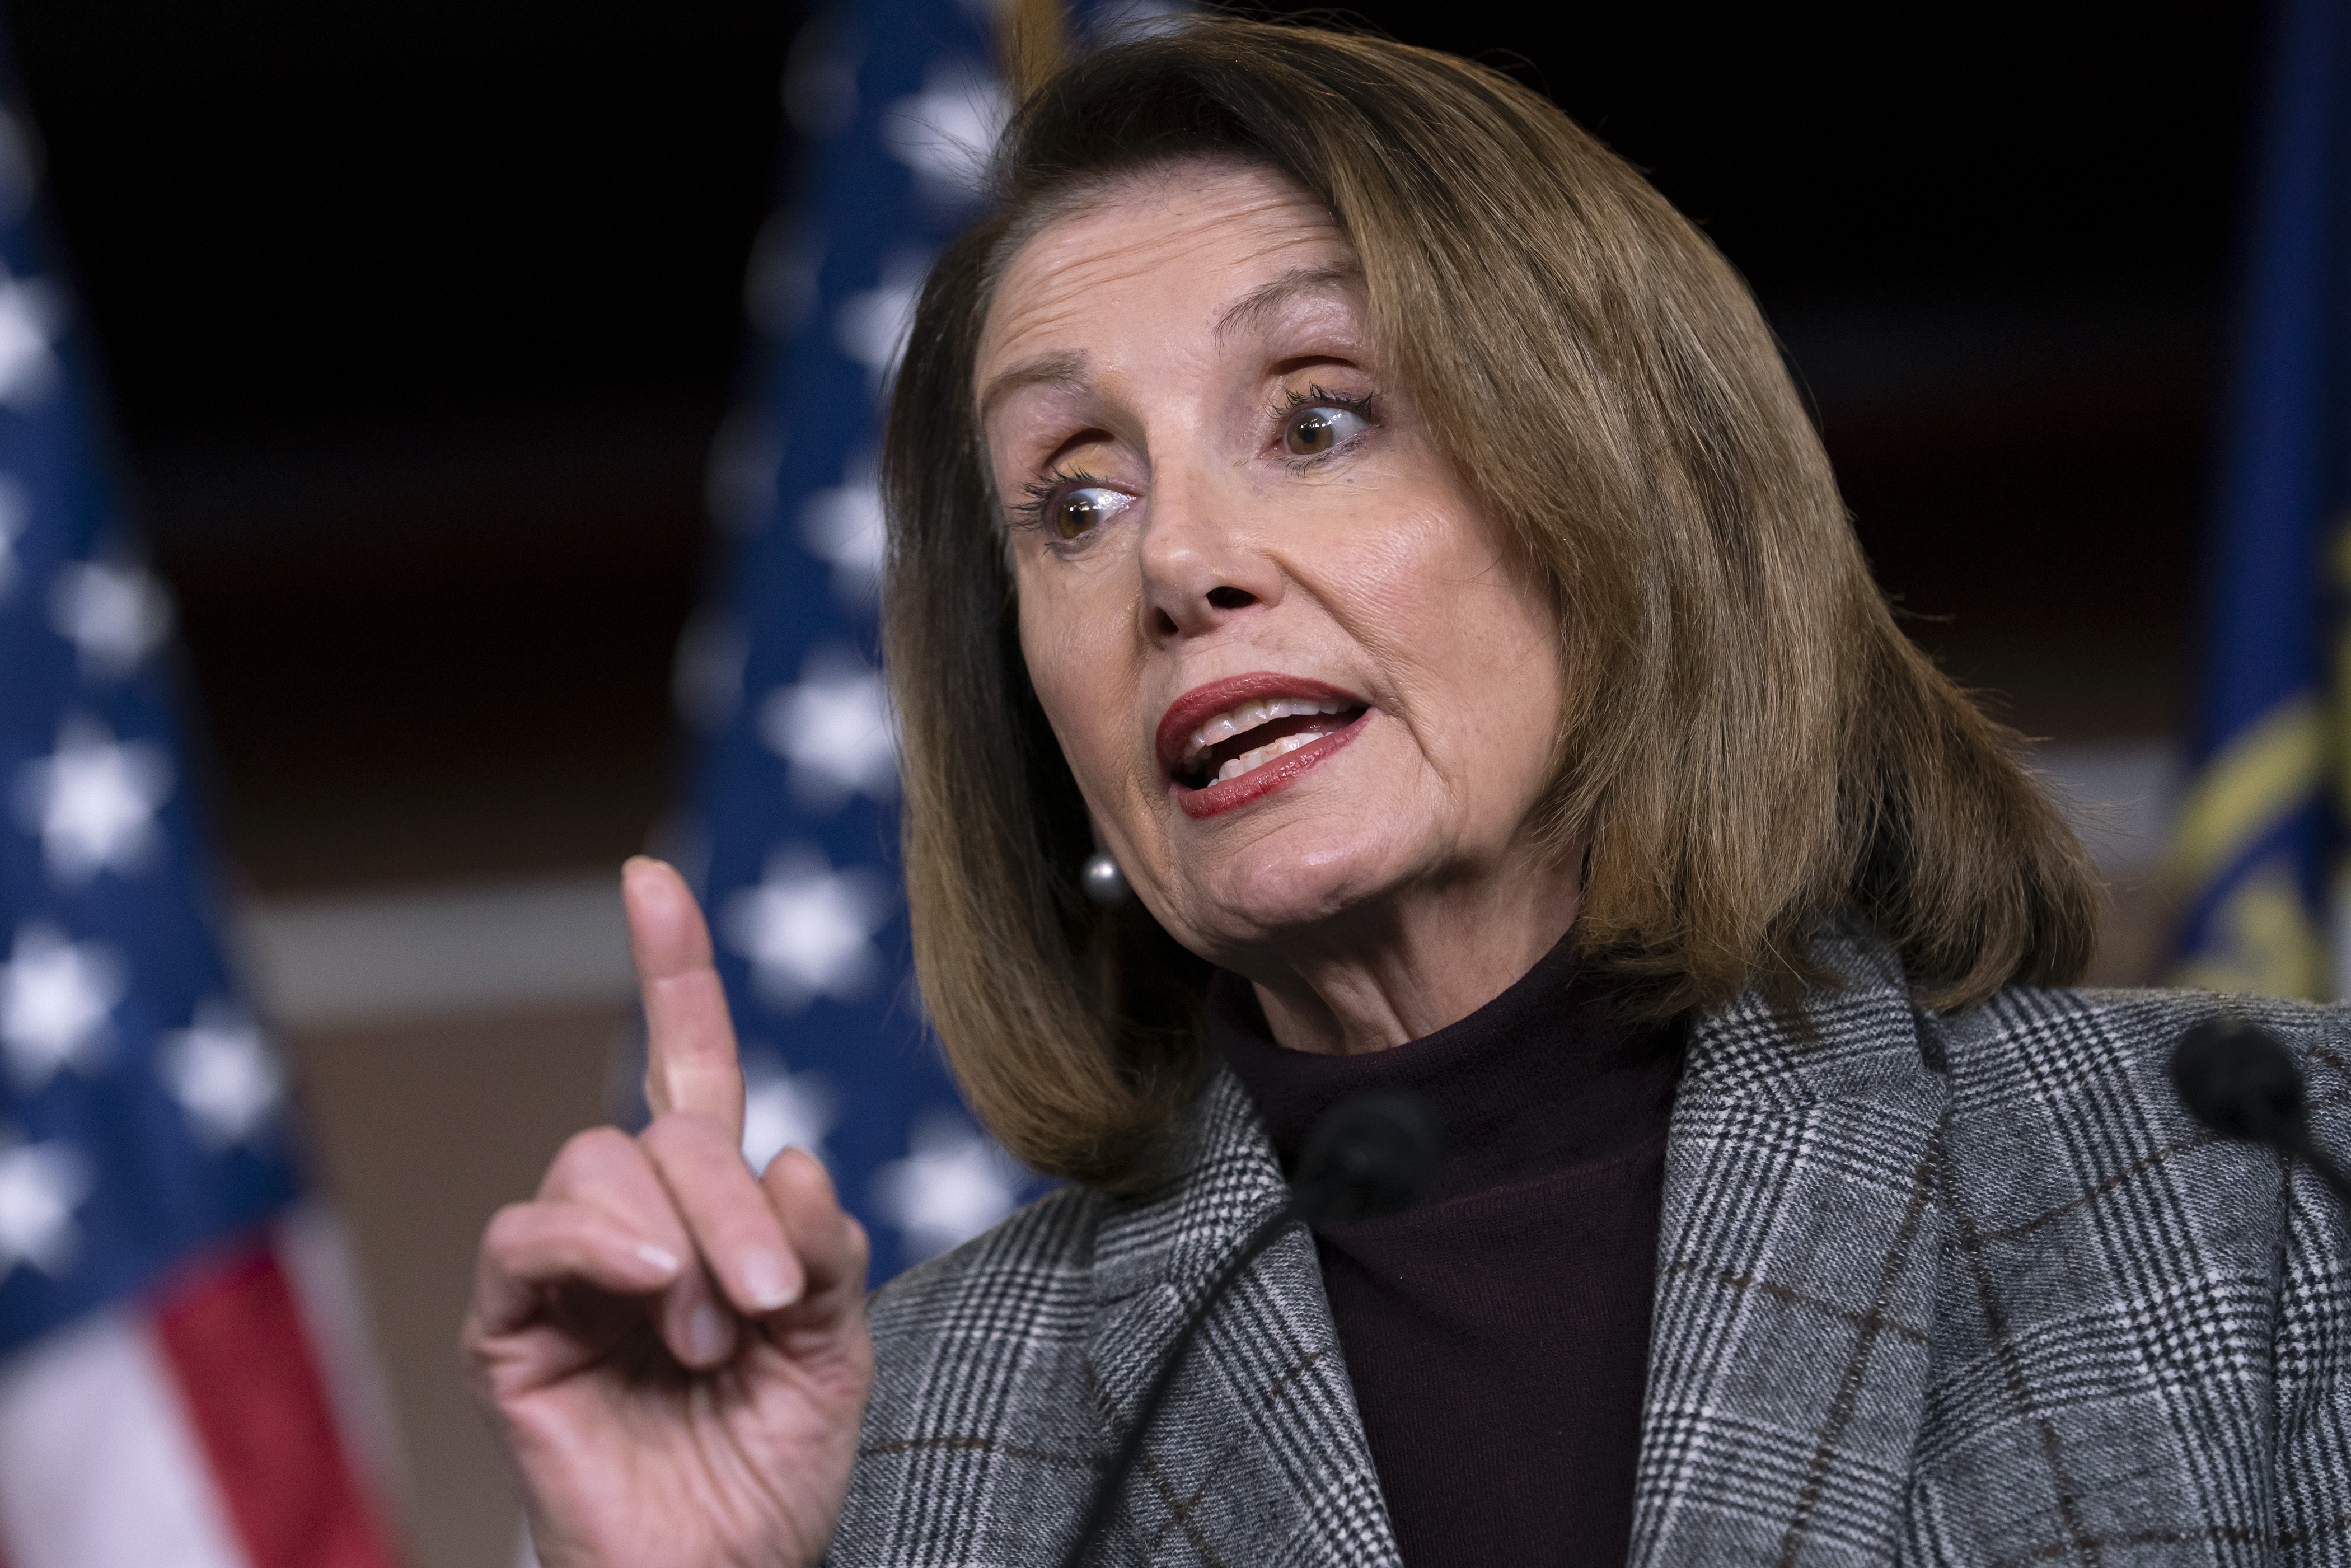 Trump Returns Home to Another Accusatory NYT Report; Pelosi Goes Off, Wont Commit to Green New Deal Vote